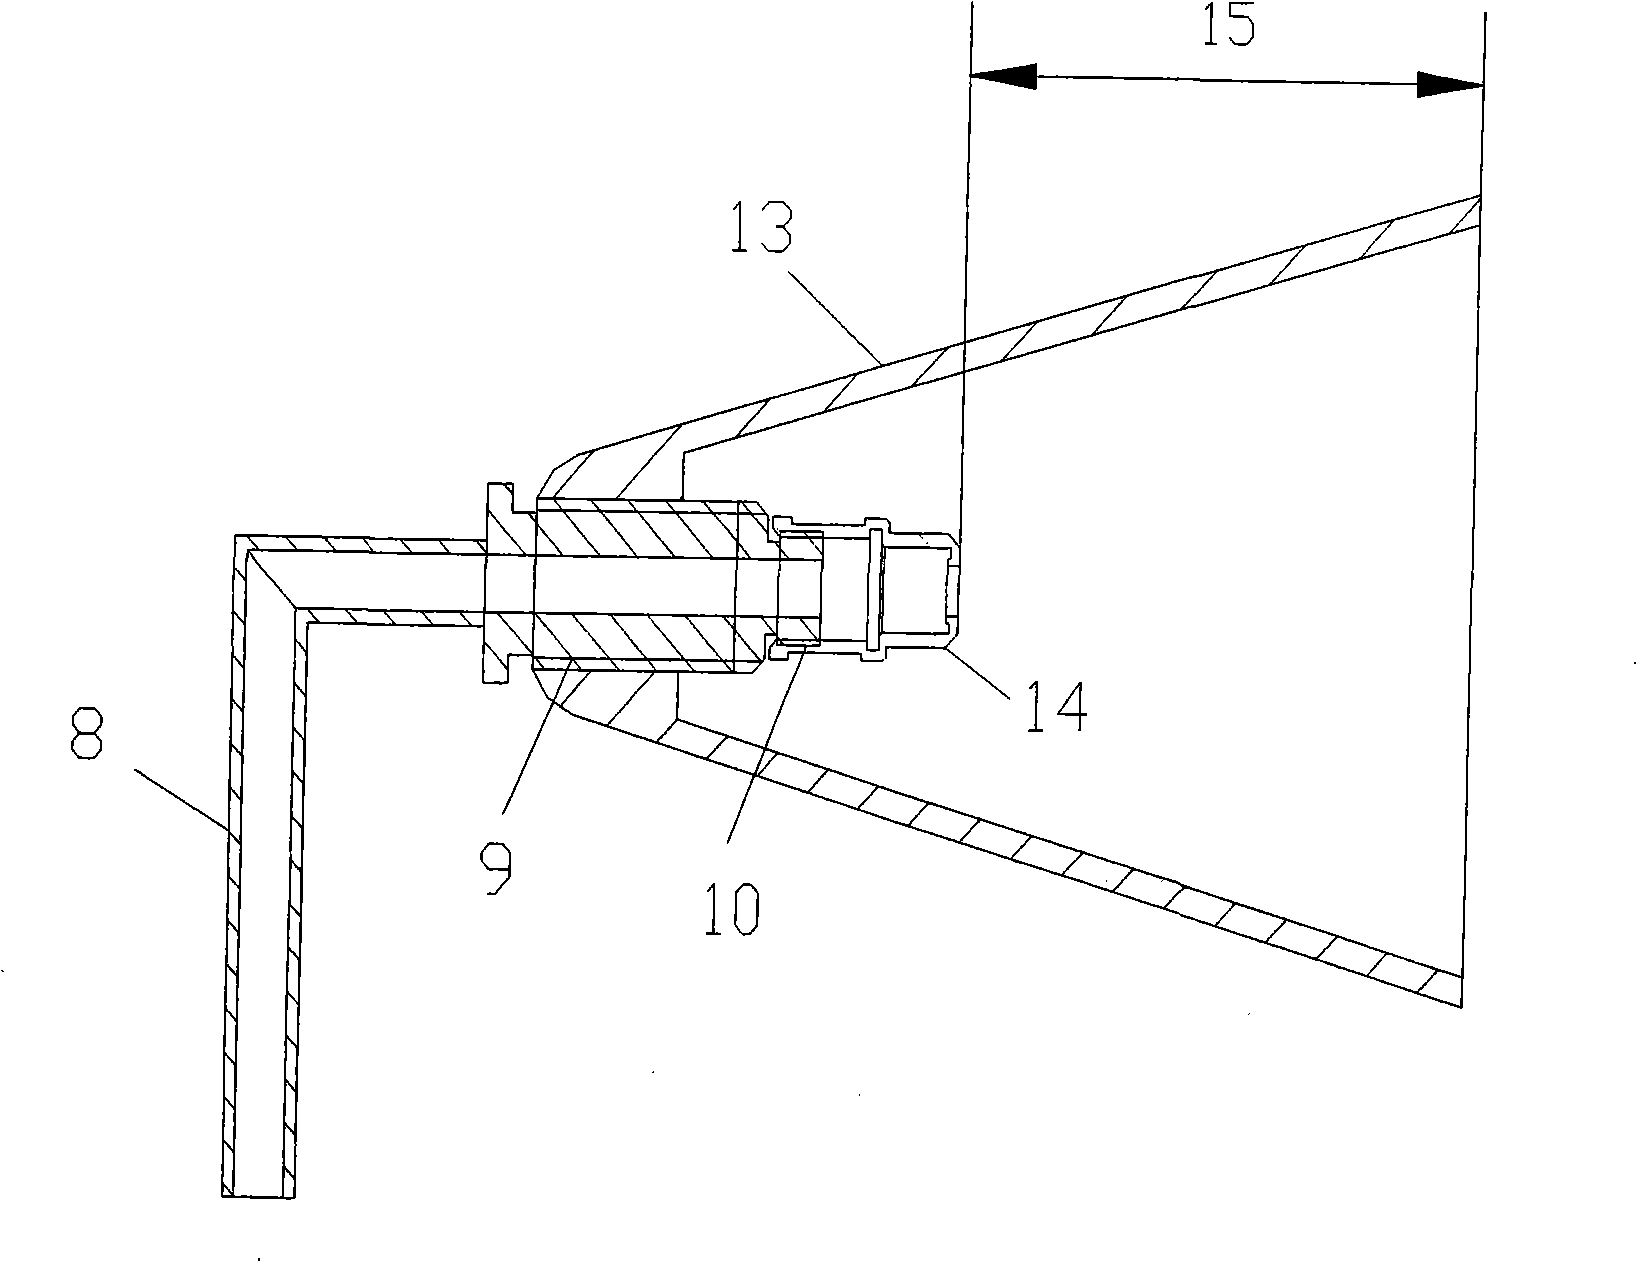 V -type cone flame holder for rotor engine